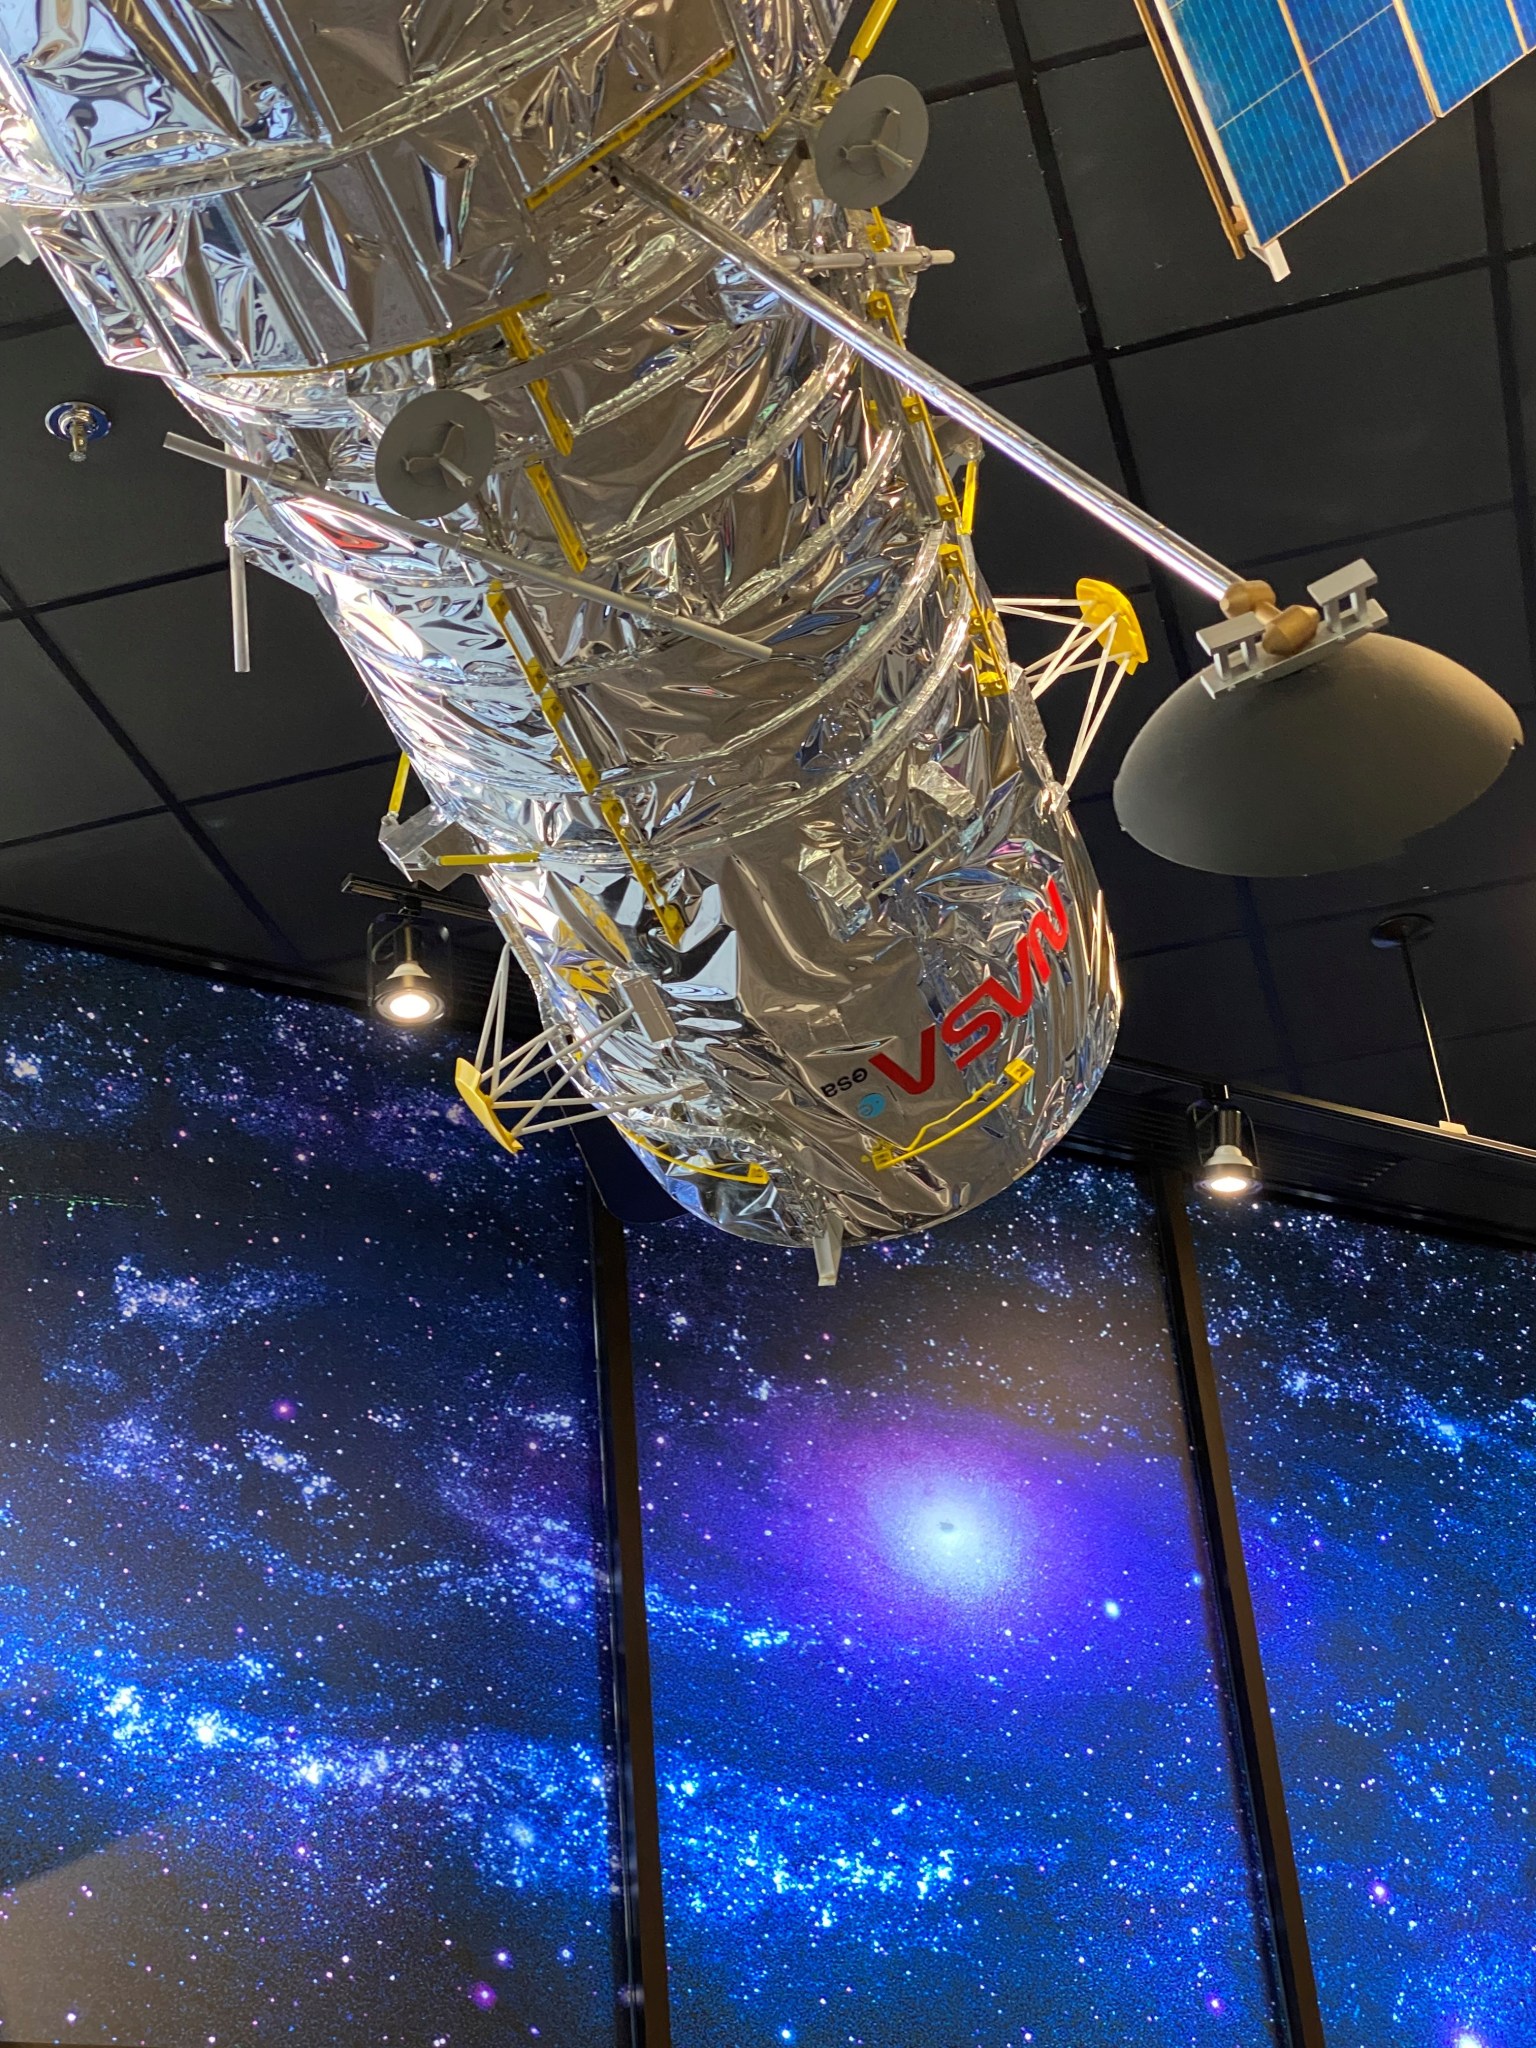 A model of the Hubble Space Telescope, a silver cylinder with an instrument arm sticking out from its center, hangs from a black ceiling in front of a lit mural of blue, purple and white galaxies.